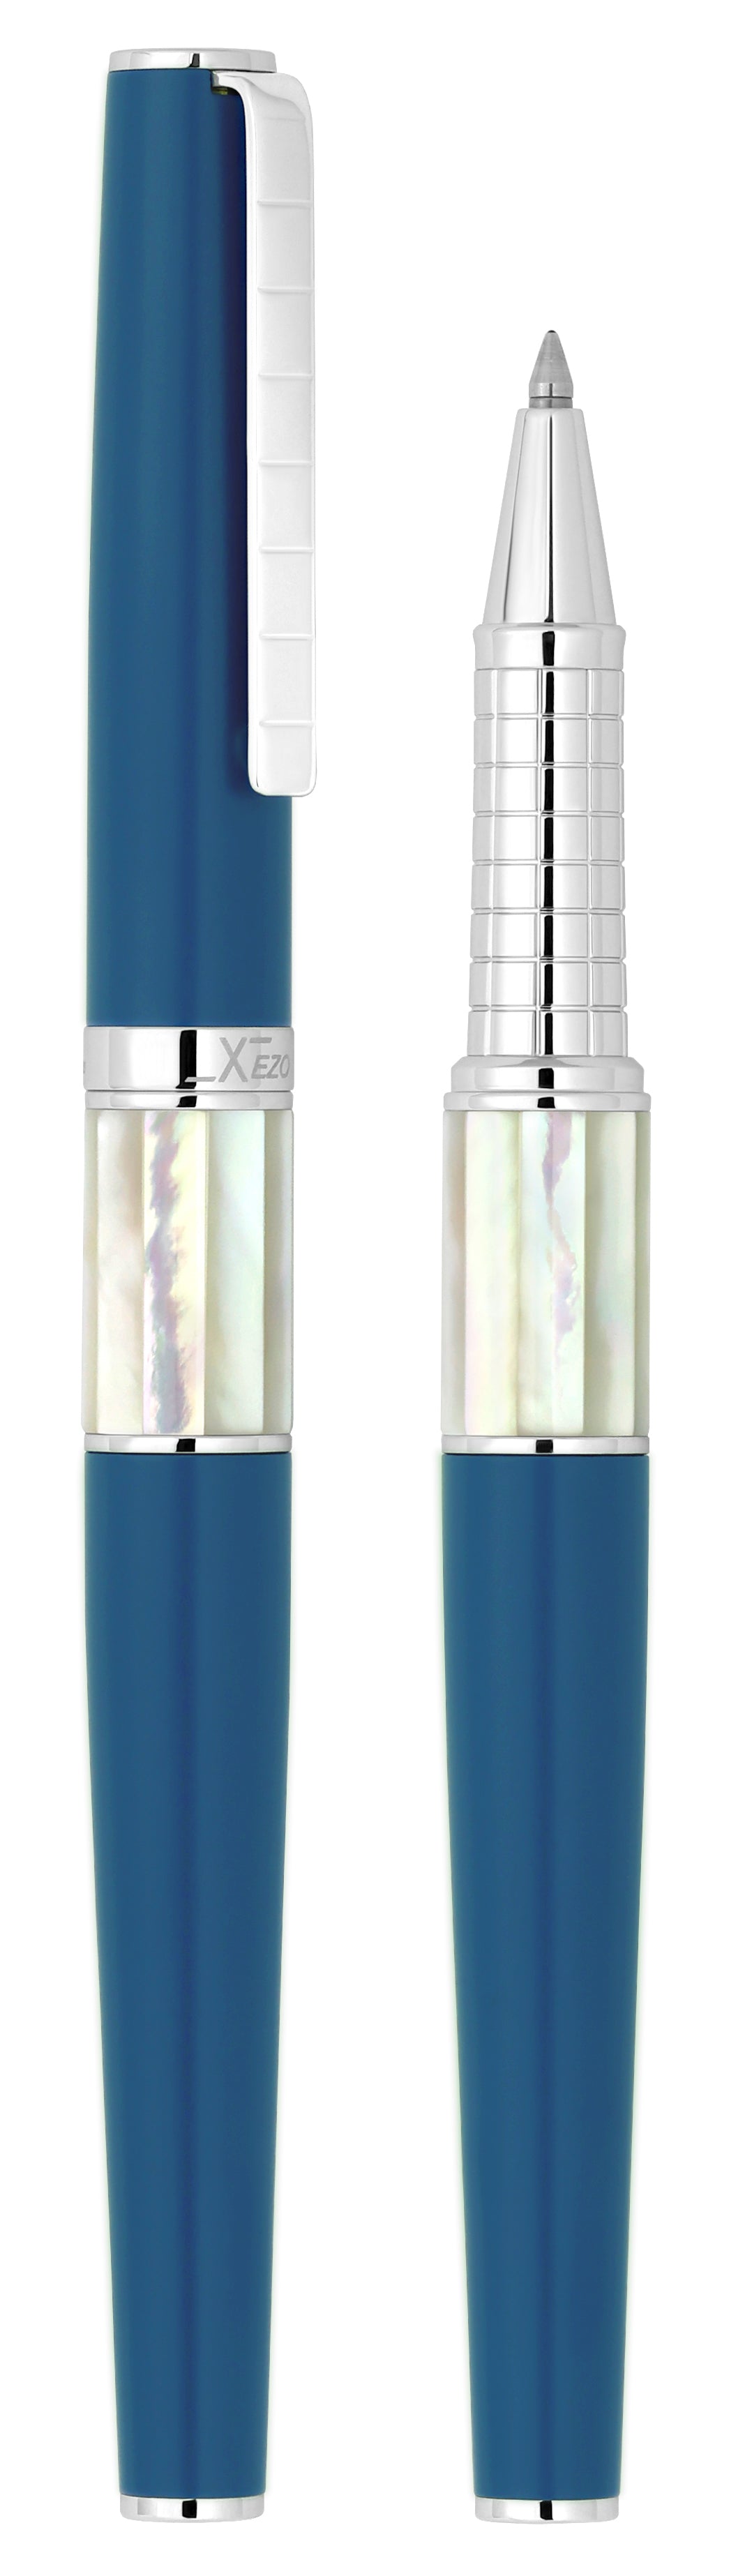 Xezo - Vertical view of two Speed Master Lapis Blue R-WC Rollerball pens; the one on the left is capped, and the one on the right is uncapped